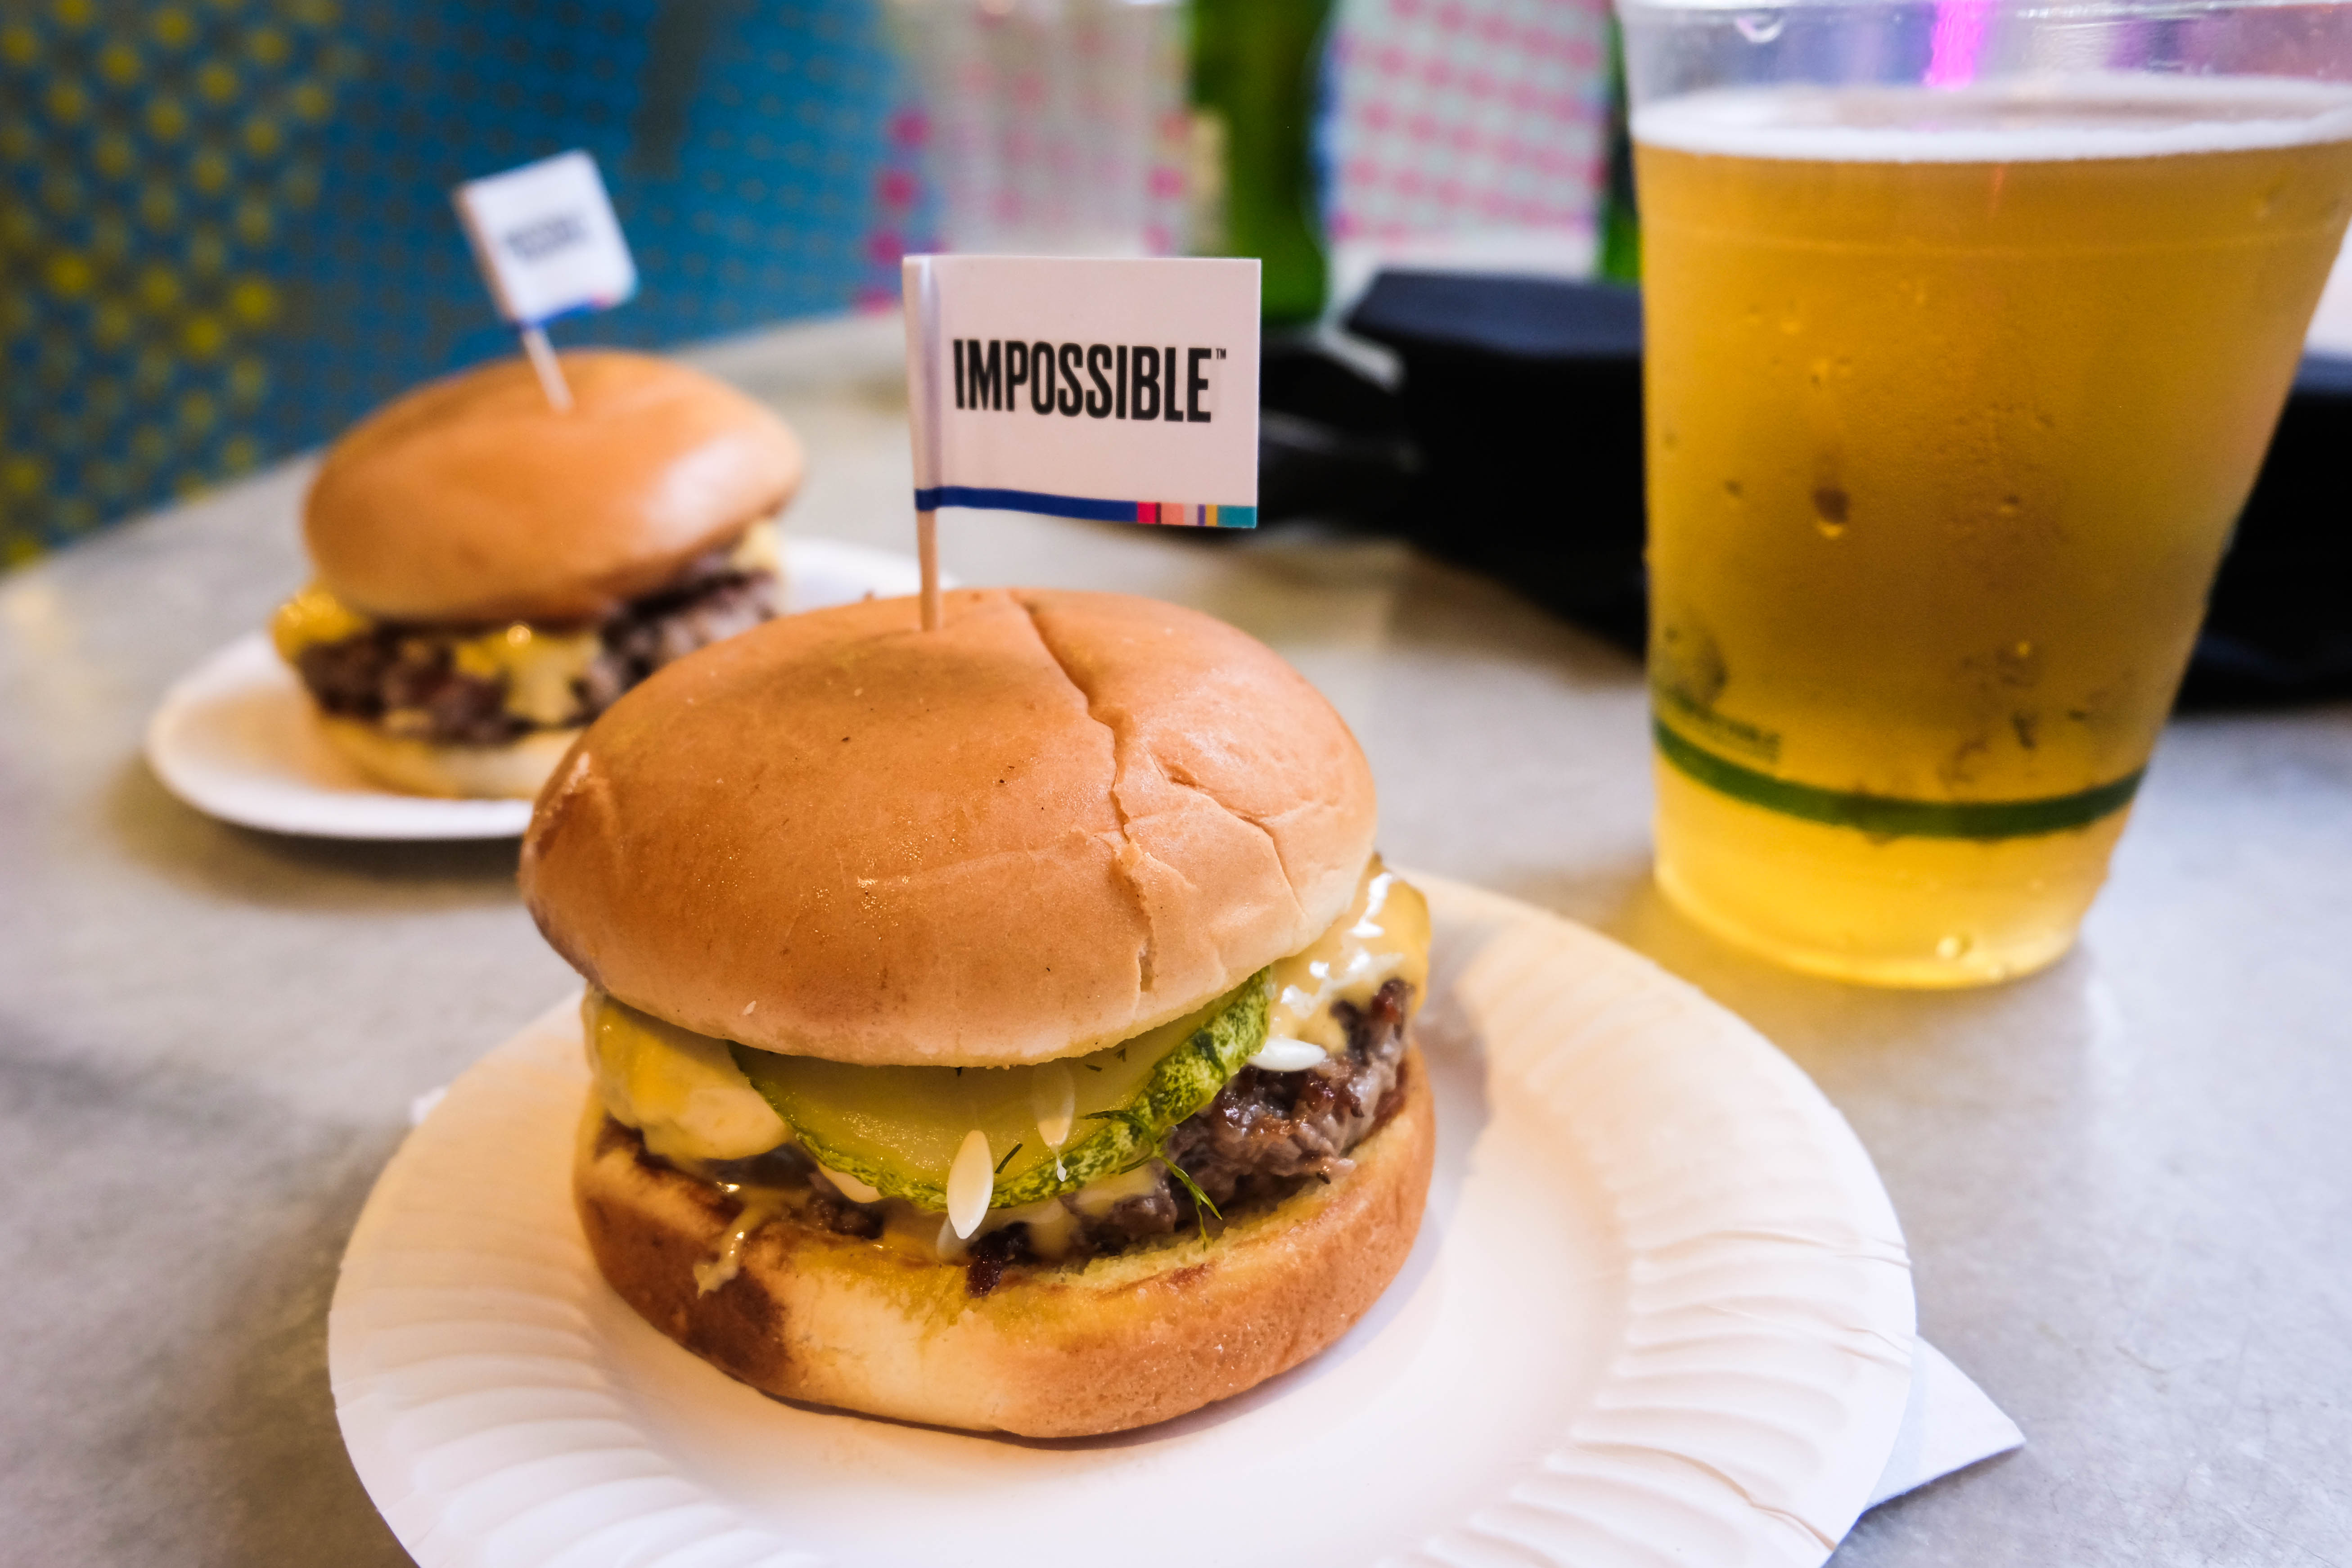 Will Ho Ching’s Impossible Burger Save The World?